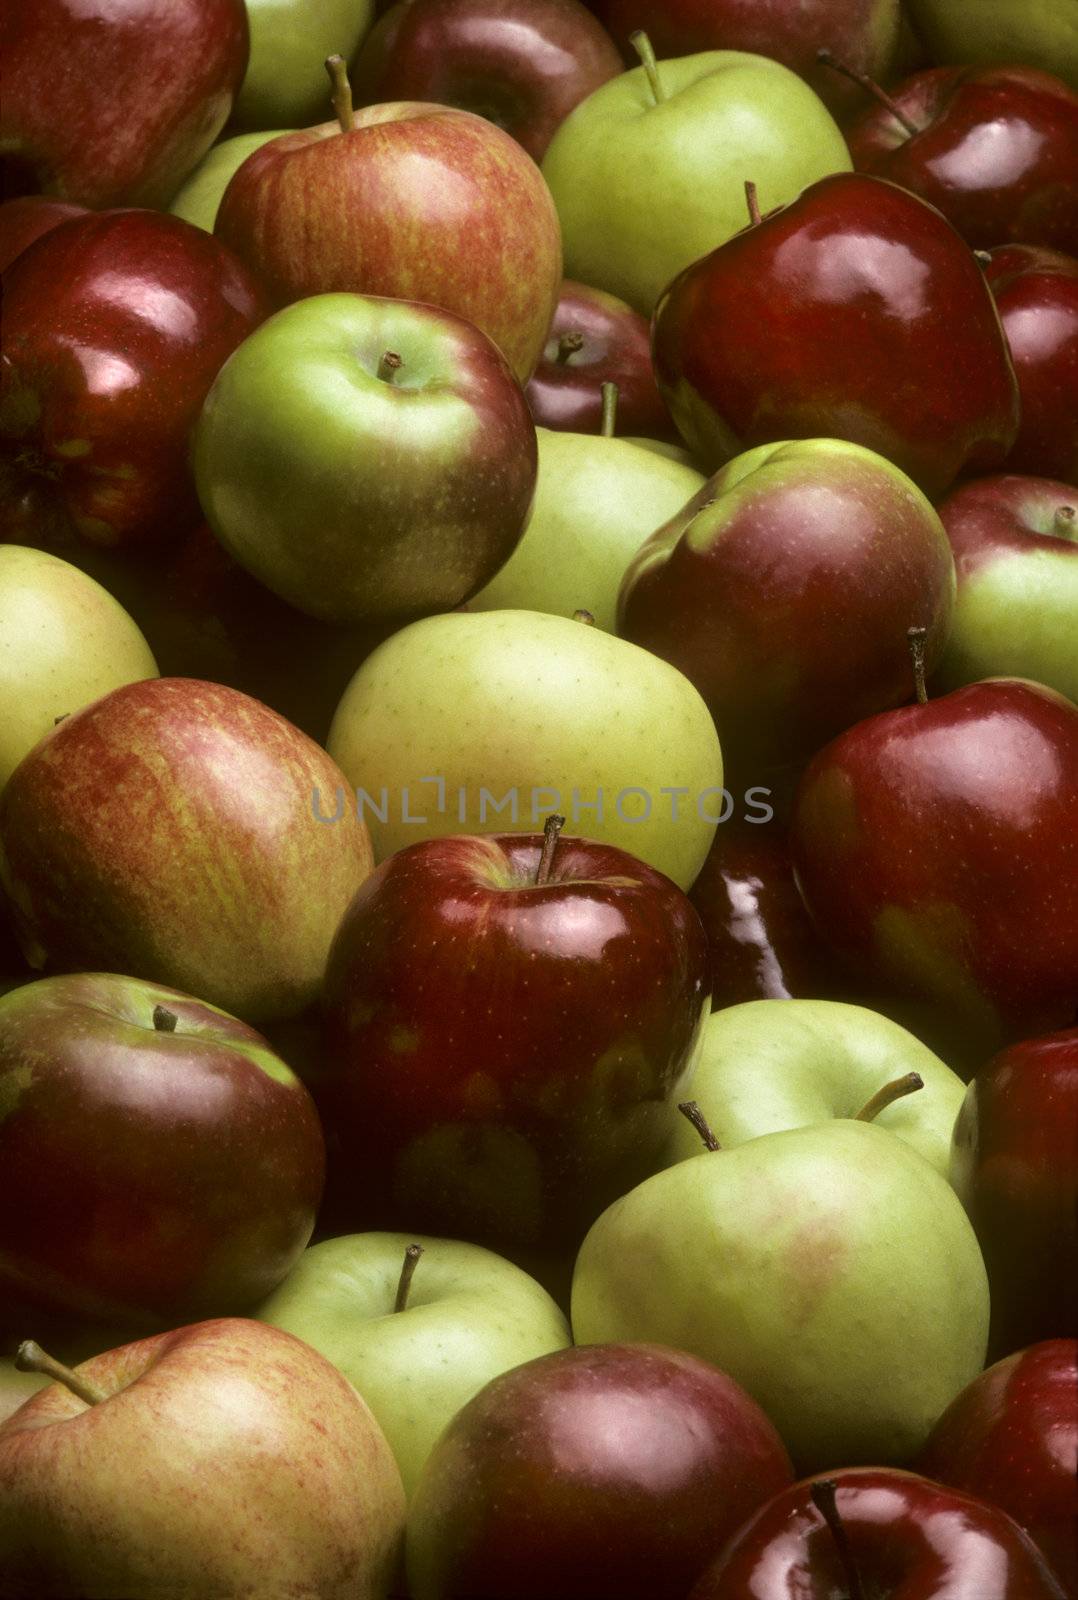 Pile of mixed varieties of apples including Red Delicious, Golden Delicious, MacIntosh